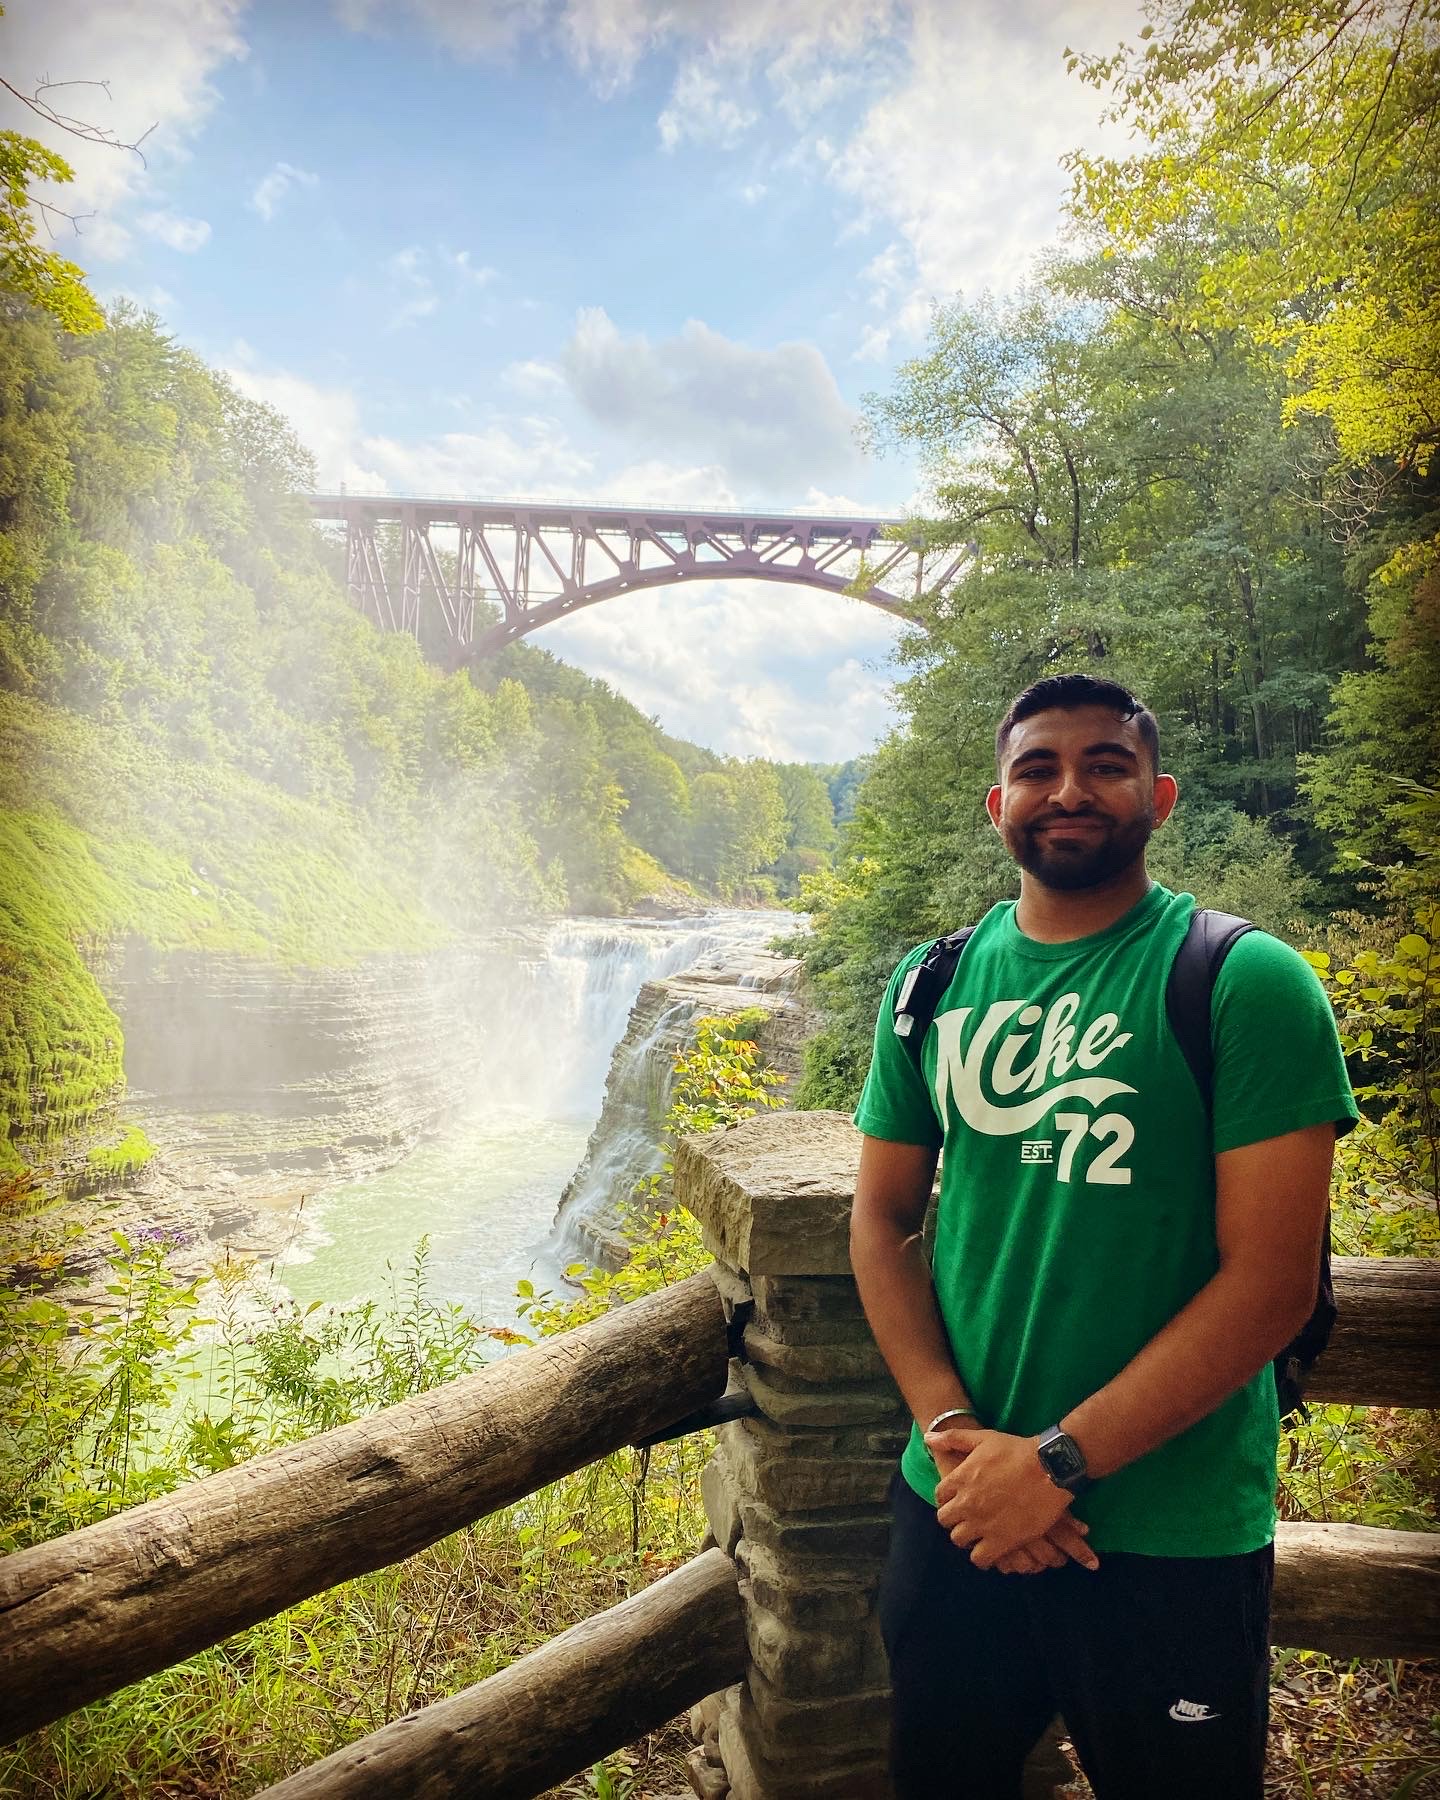 Photo of Dhruvesh standing in front of a waterfall and trestle bridge